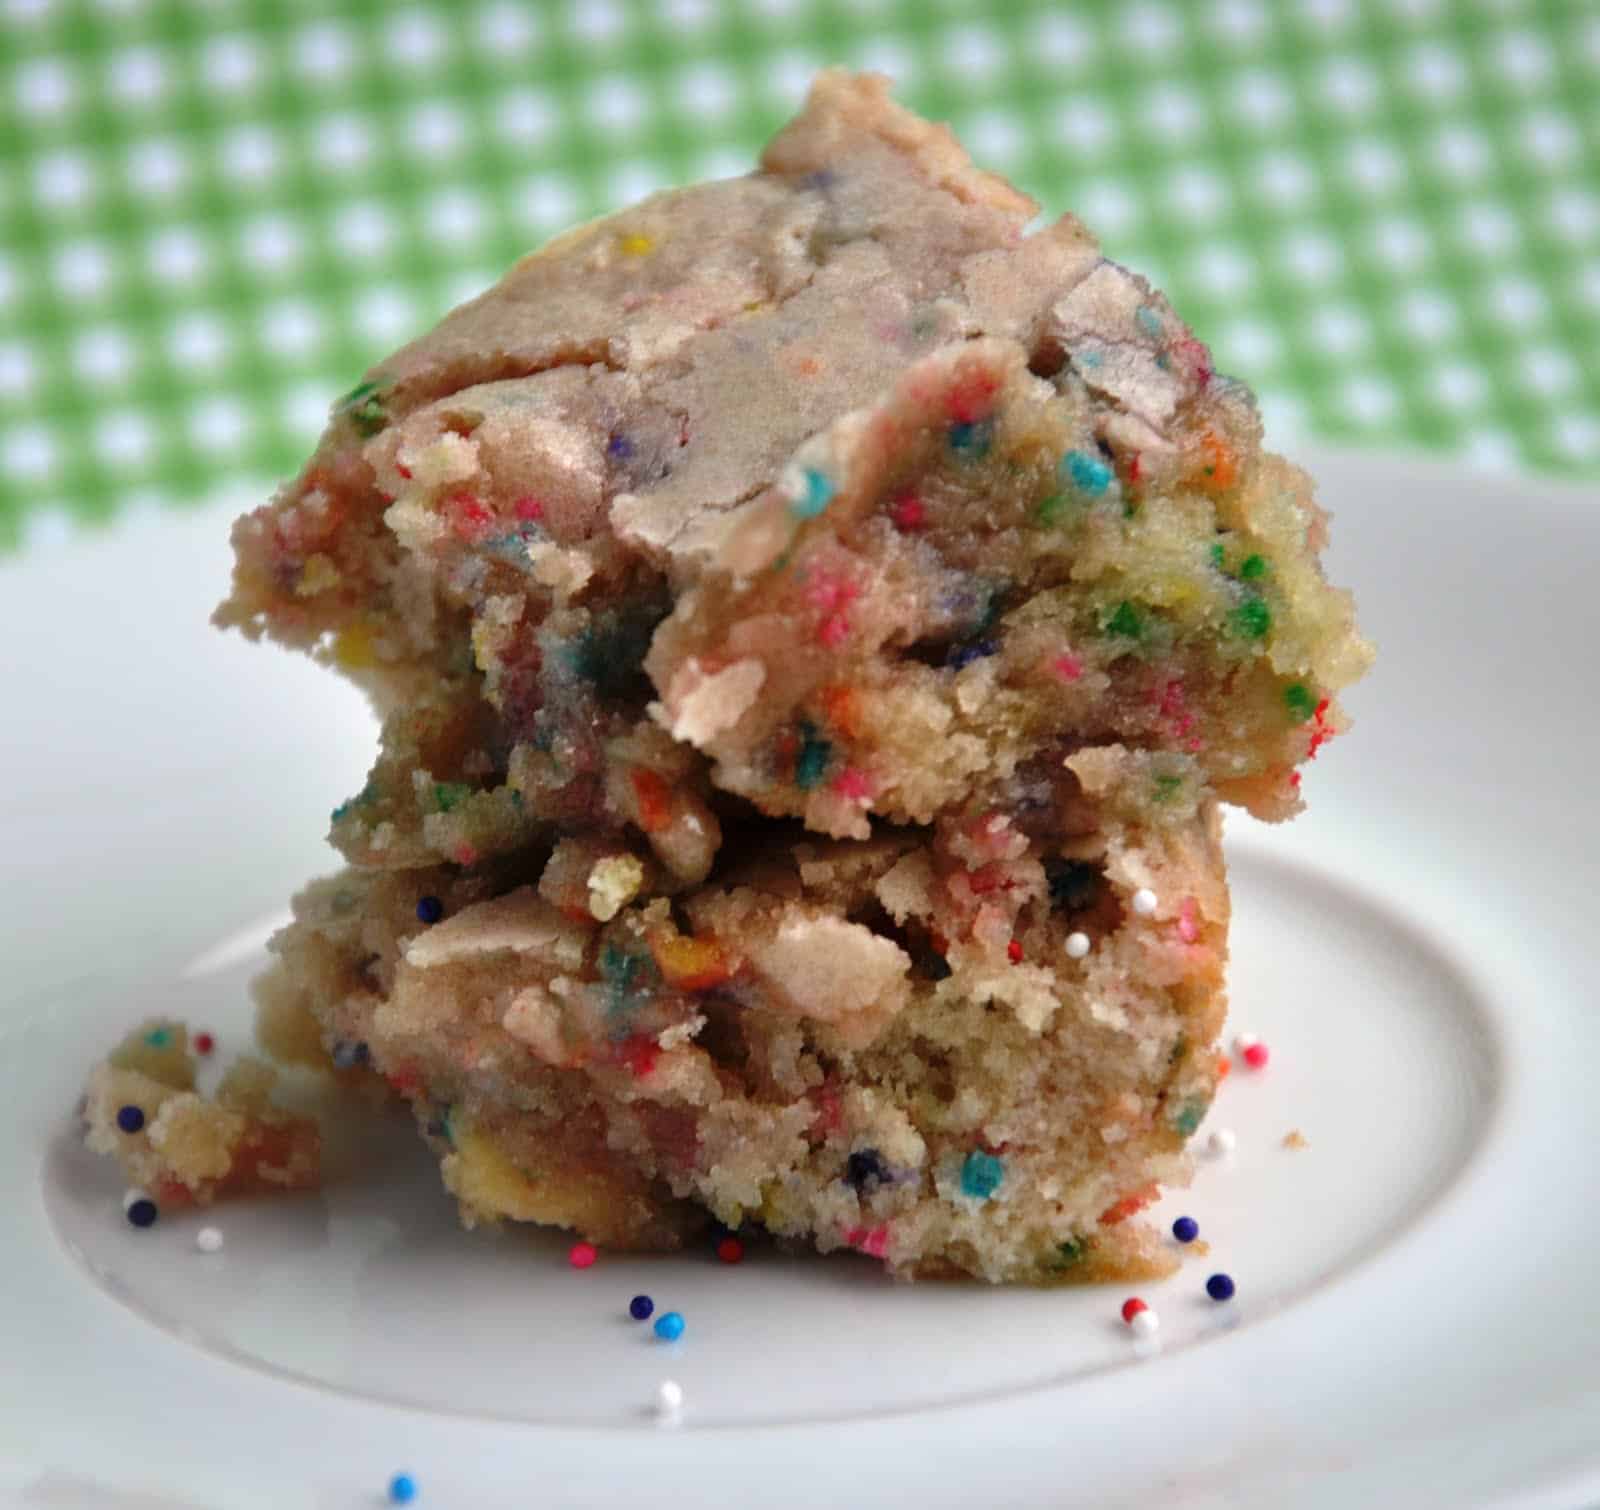 Cake Batter Blondies made from scratch!